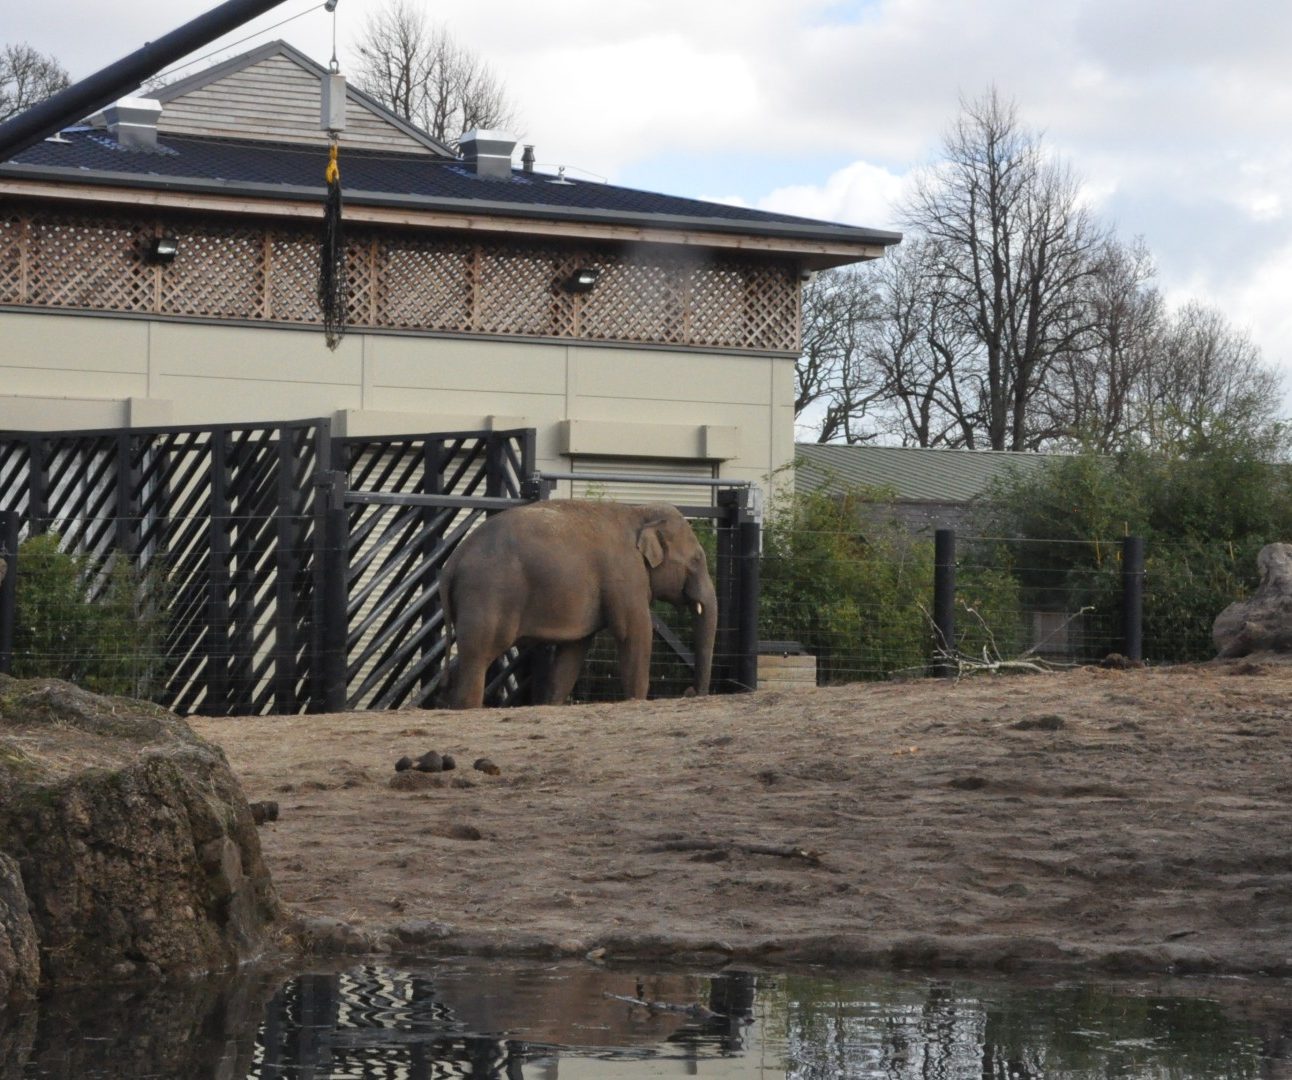 An elephant standing in a zoo enclosure